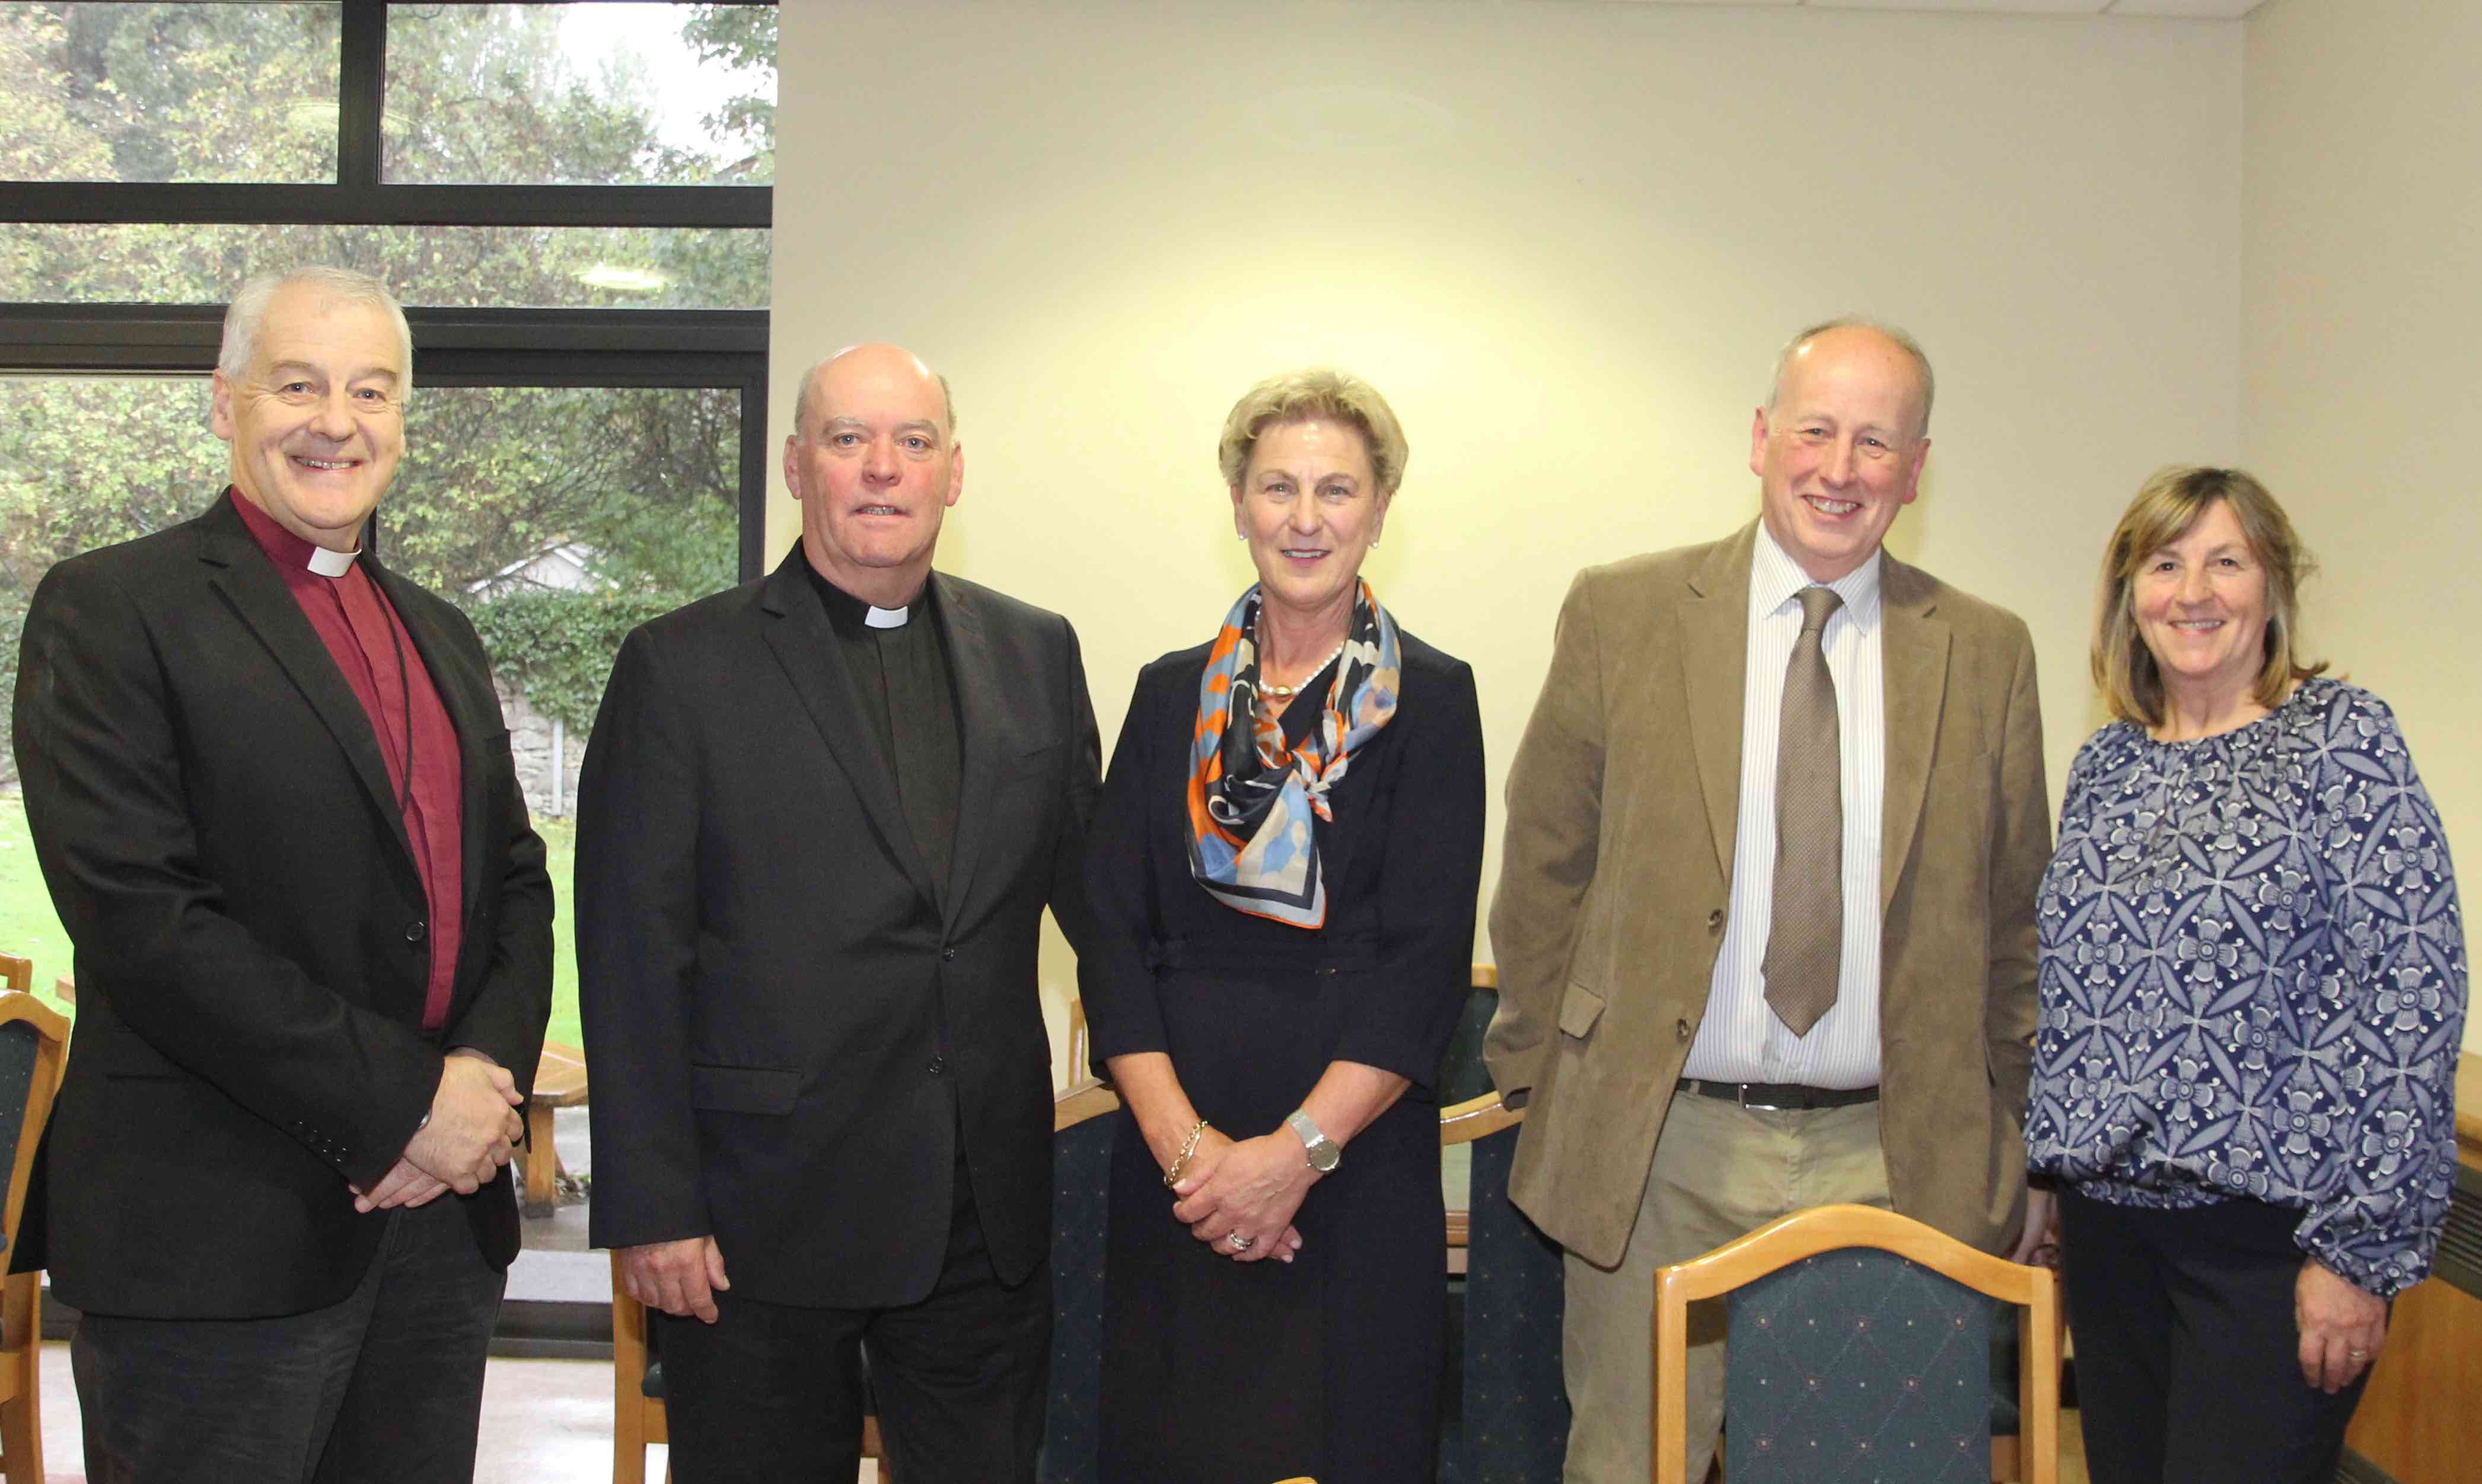 Archdeacon Ricky Rountree (second from left) with Archbishop Michael Jackson, Diocesan Secretaries Sylvia Heggie and Jennifer Byrne and Derek Neilson of Diocesan Councils.